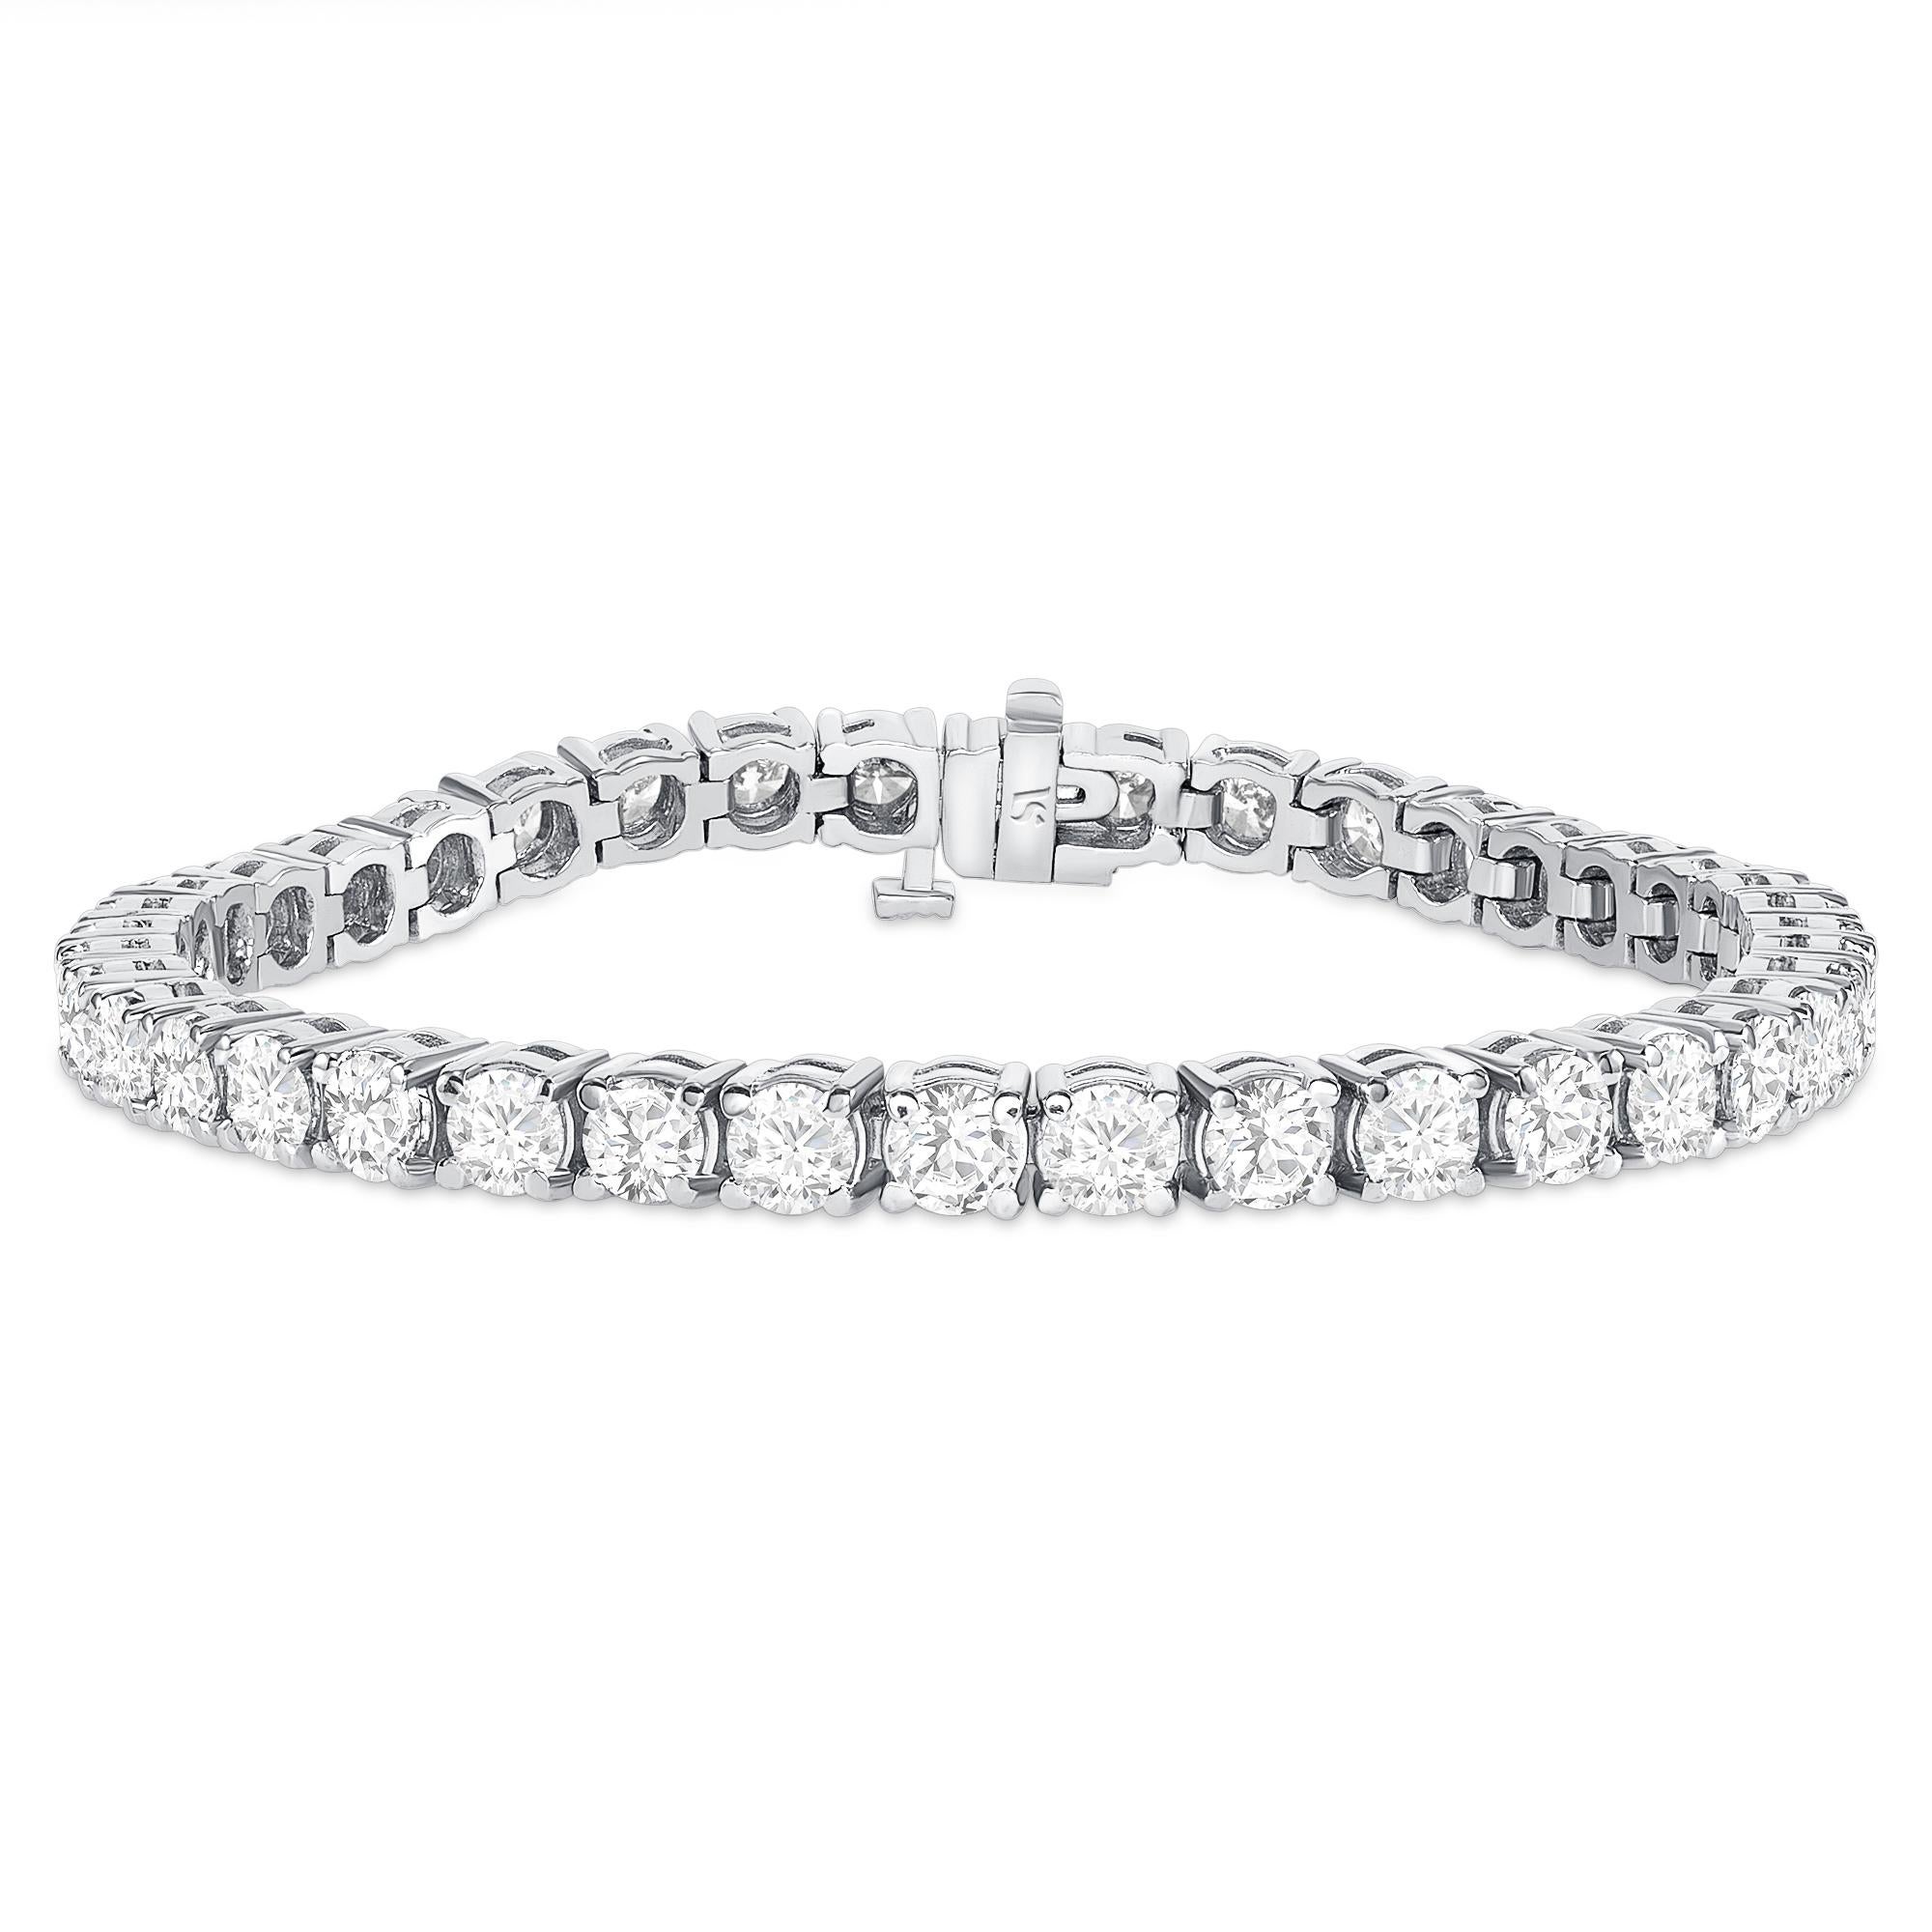 12.30 tcw 14k Gold Diamond Tennis Bracelets 

Wrap your wrist in this stunning tennis bracelets incomparable brilliance from round diamonds. Set in 14K solid gold, this beautiful natural diamond bracelet features a secure clasp so you can wear it on